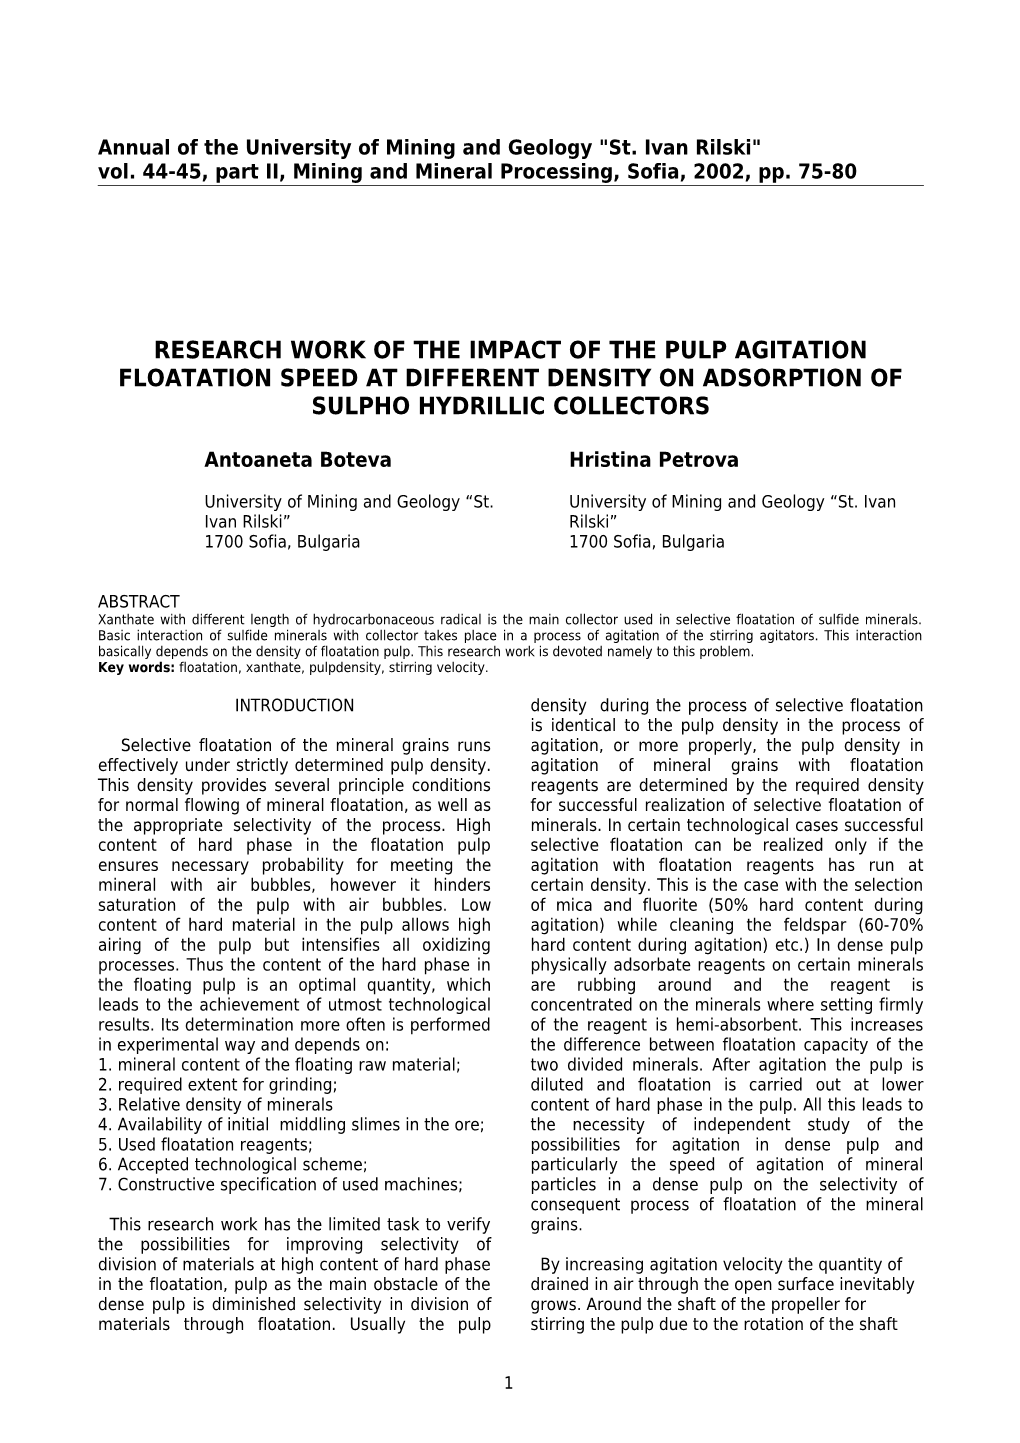 Research of the Impact of the Speed of Stirring the Floatation Pulp